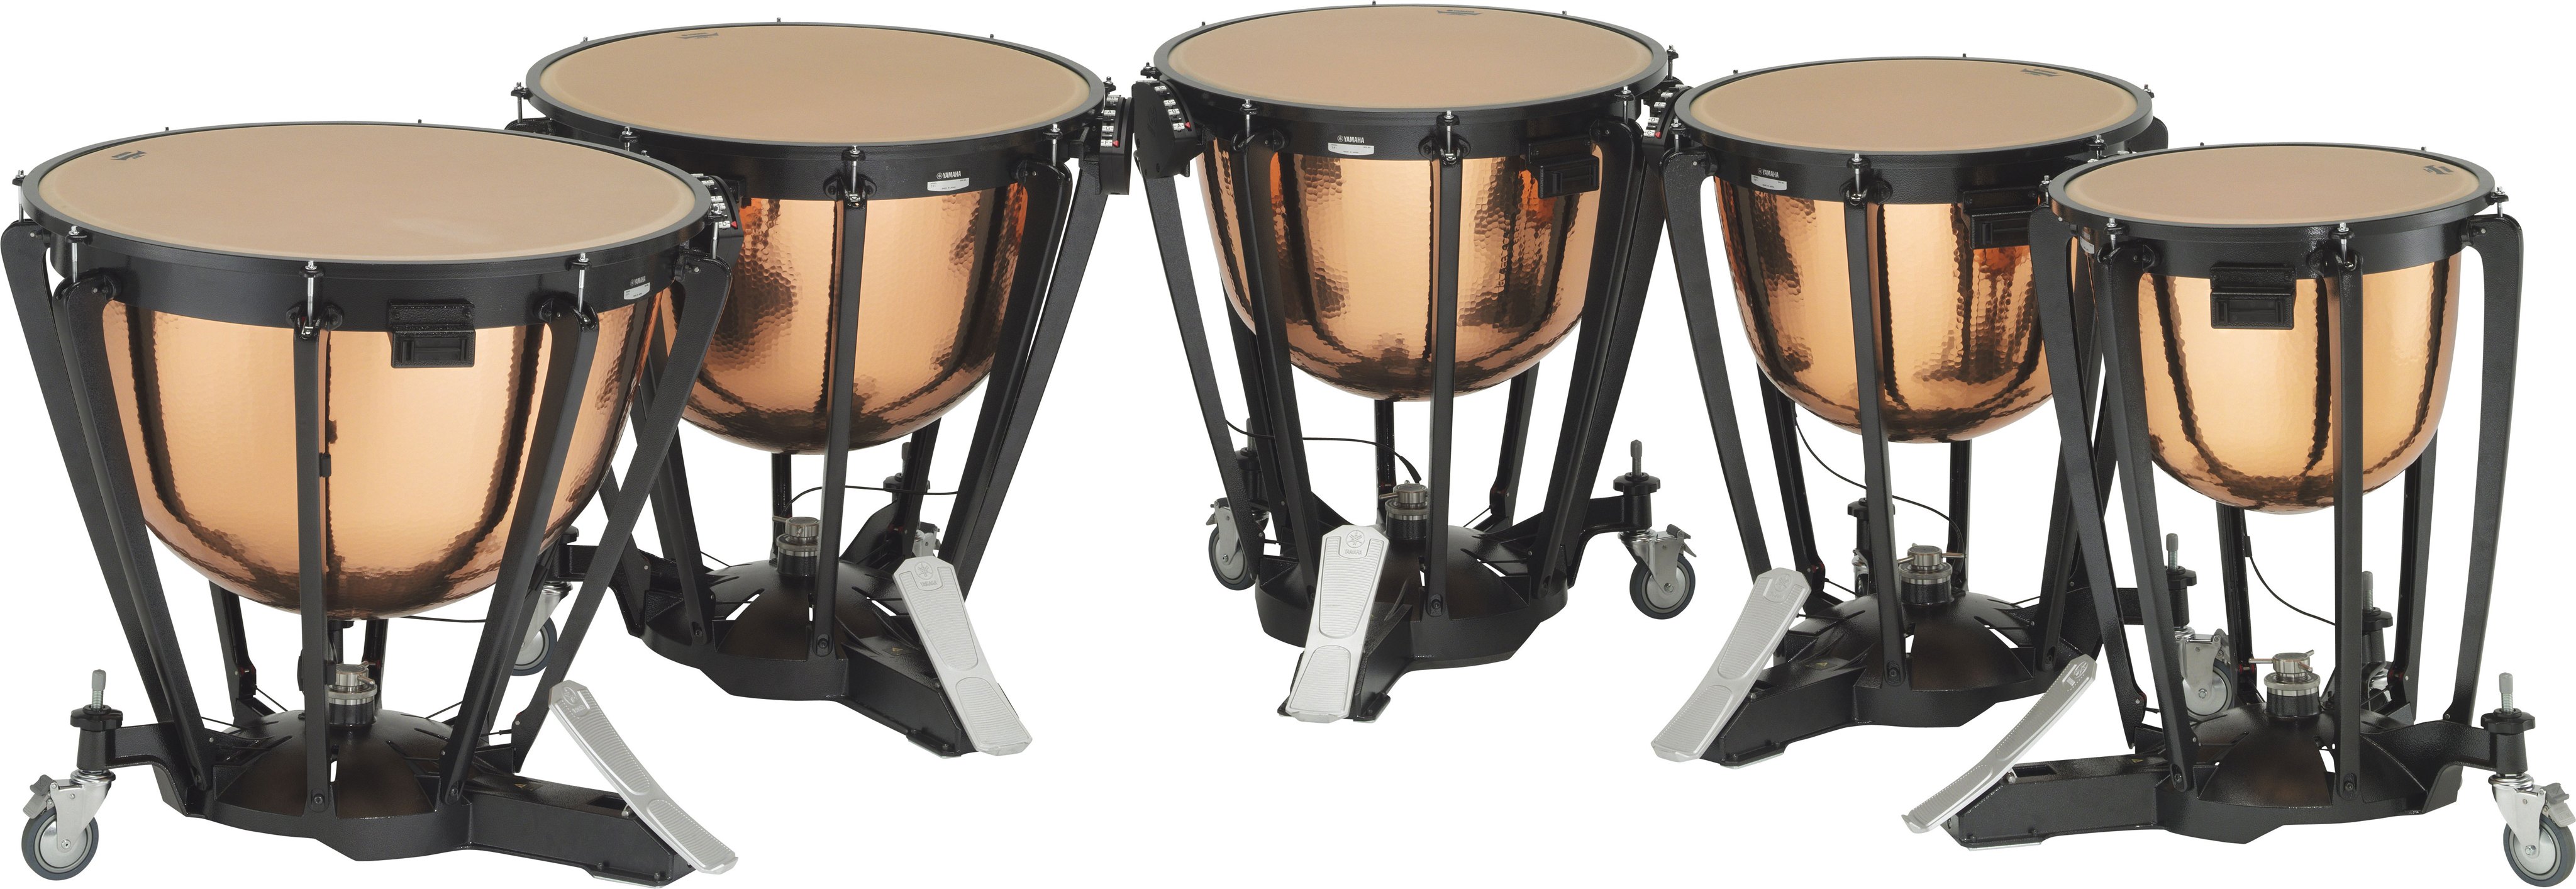 TP-7300 Series

              7300 Series Professional Hammered Copper Timpani



              Discontinued